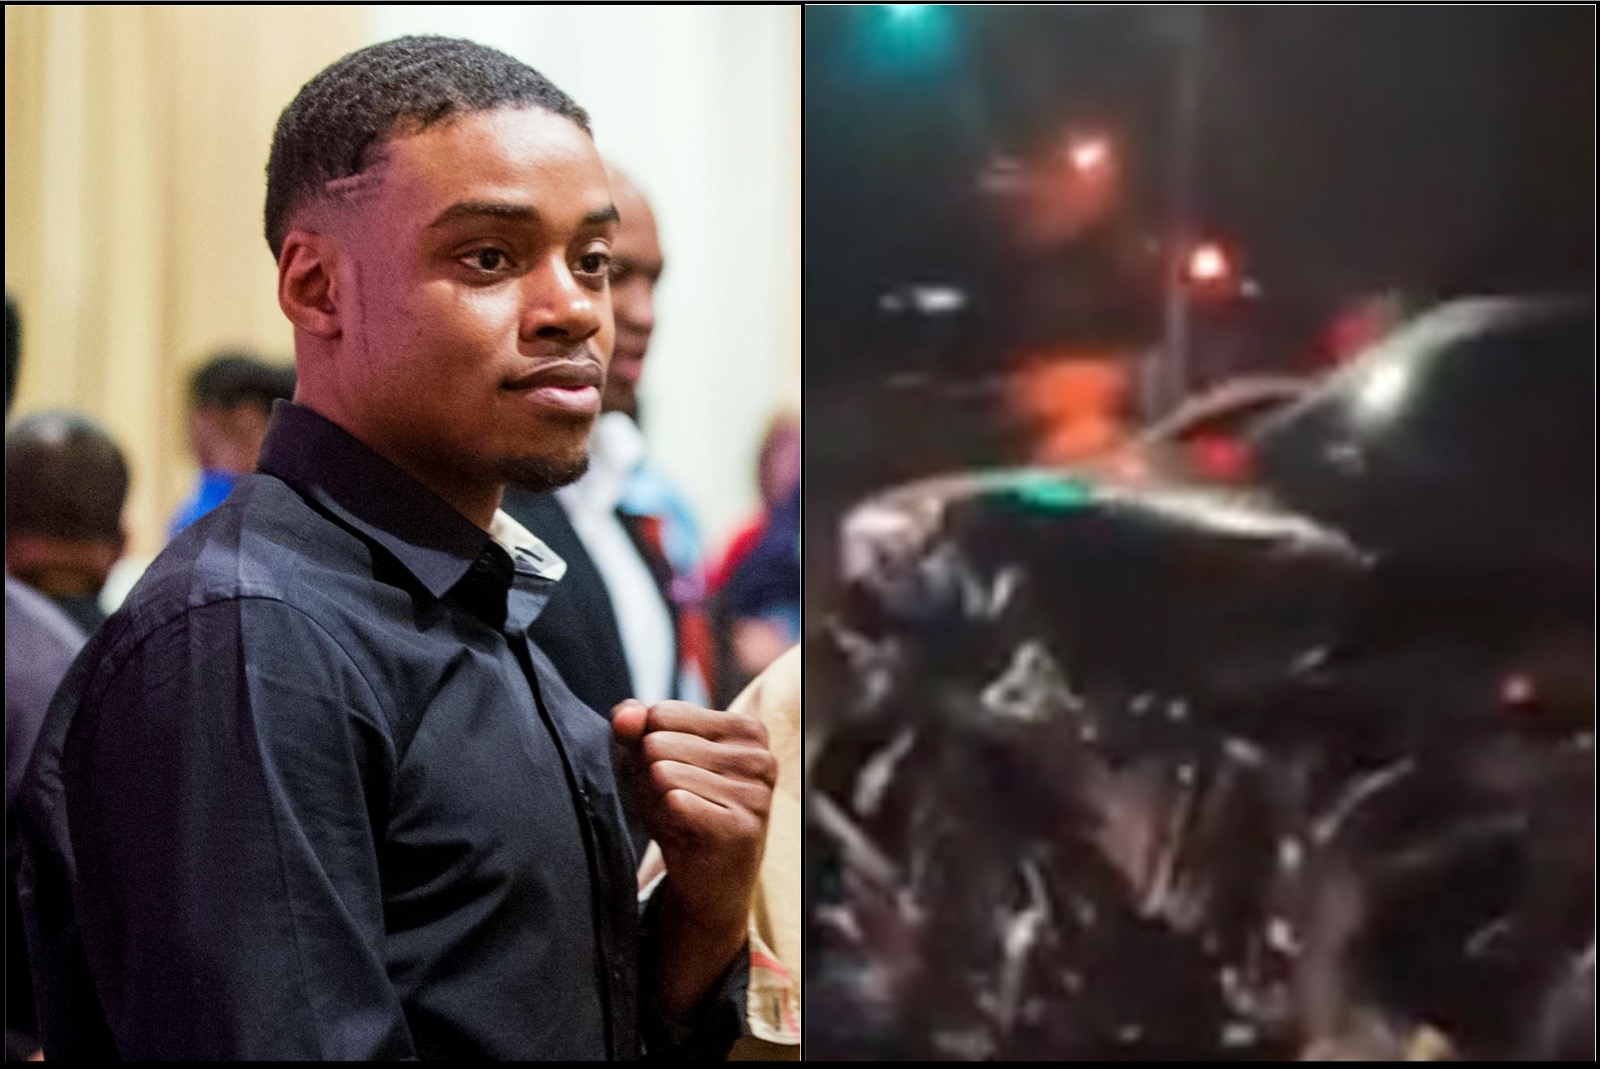 Errol Spence Jr. Survives Another Car Accident; Hit Head on By 14-Year-Old Driver